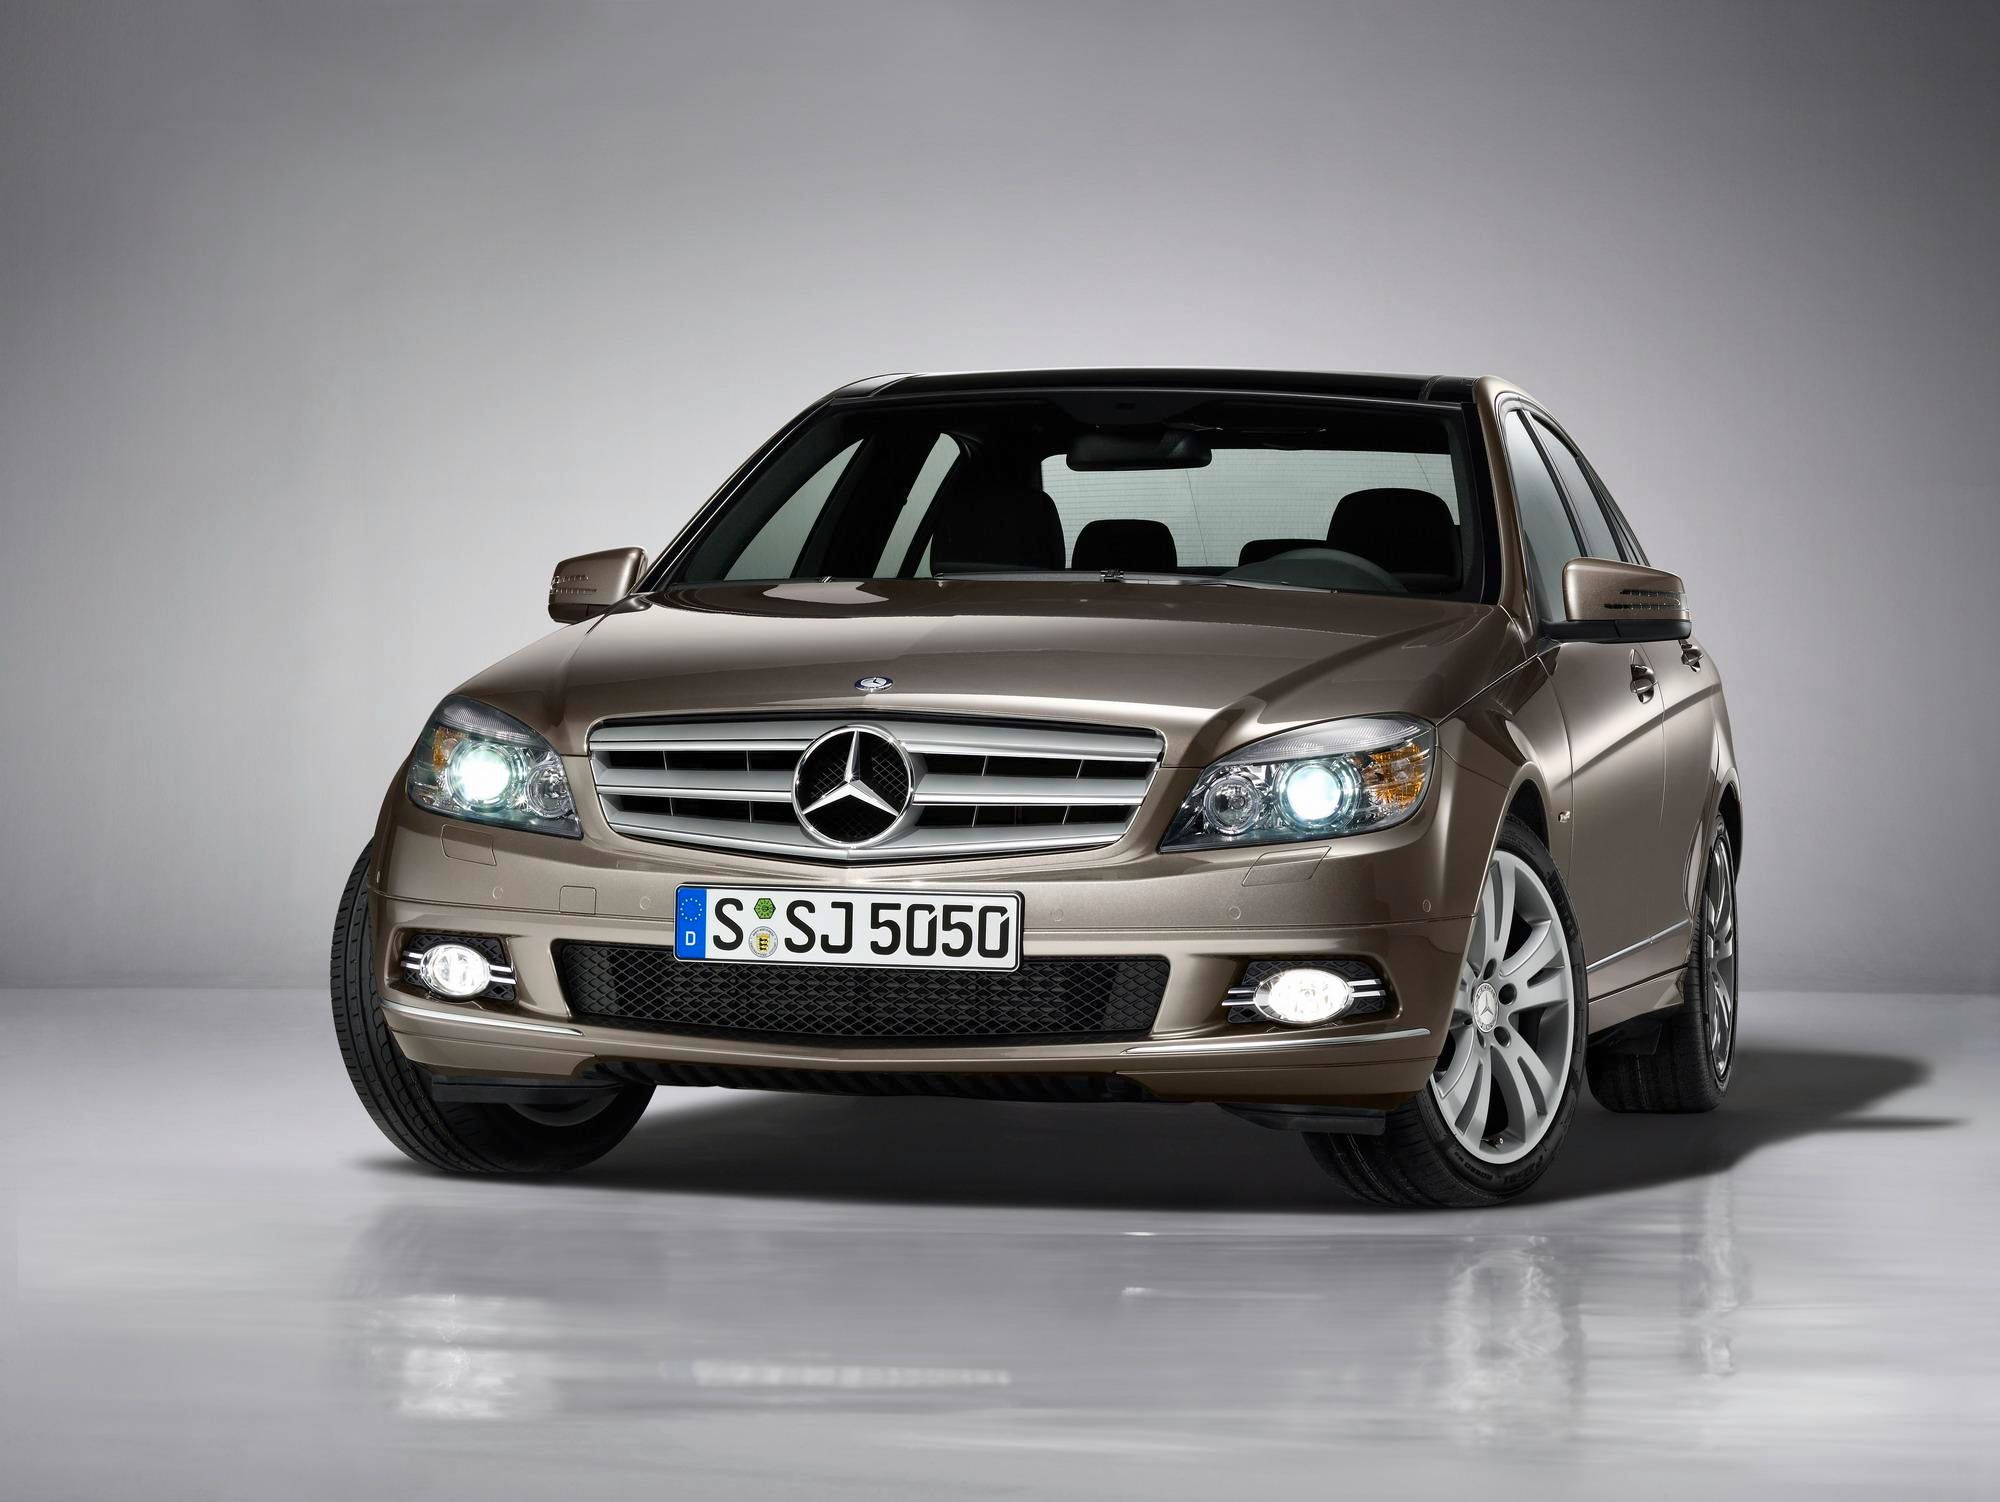 2009 Mercedes C-Class Special Edition